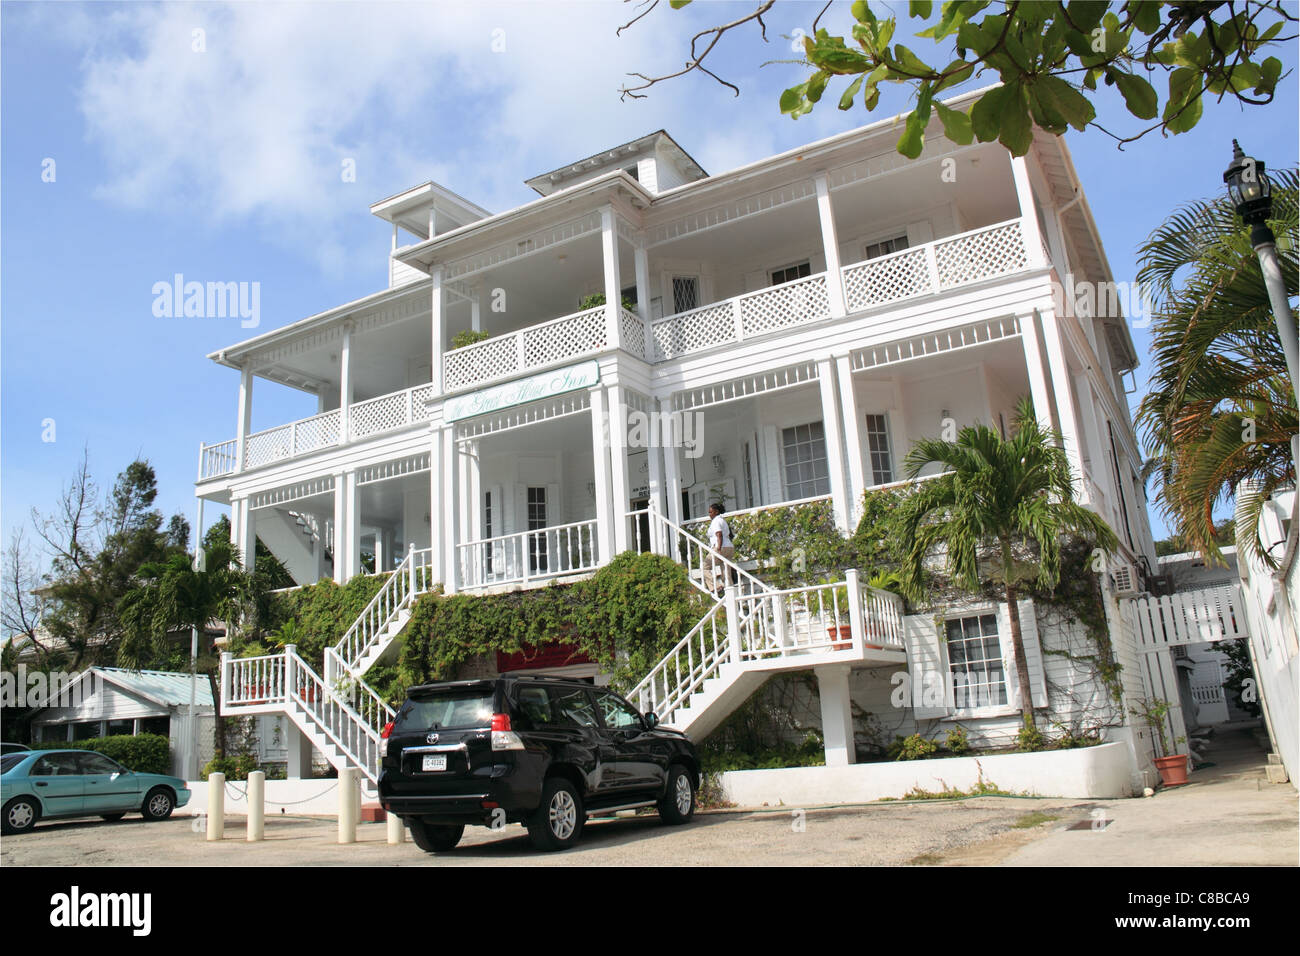 The Great House hotel, dating from 1927, Cork Street, Fort George, Belize City, Belize, Caribbean, Central America Stock Photo